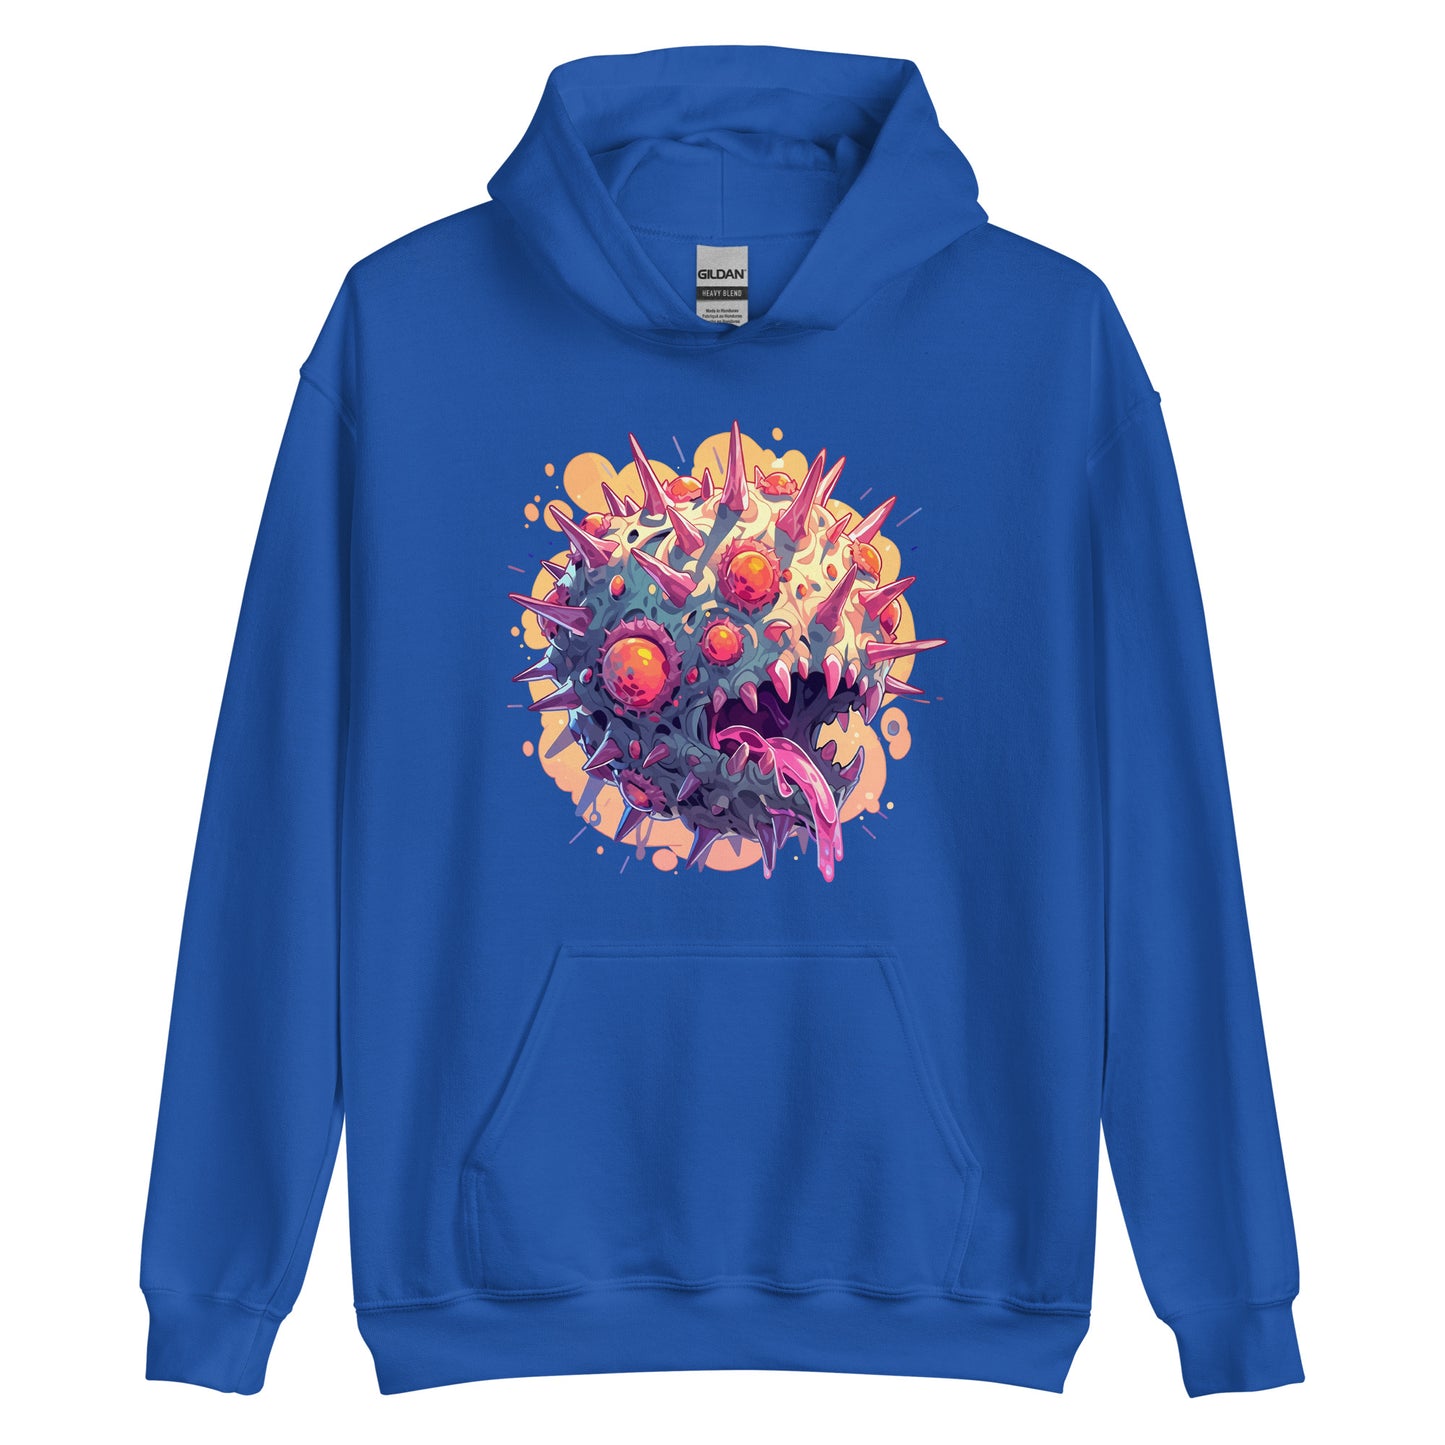 Orange evil eyes, Crazy illustration, Zombie virus with sharp horns and fangs - Unisex Hoodie